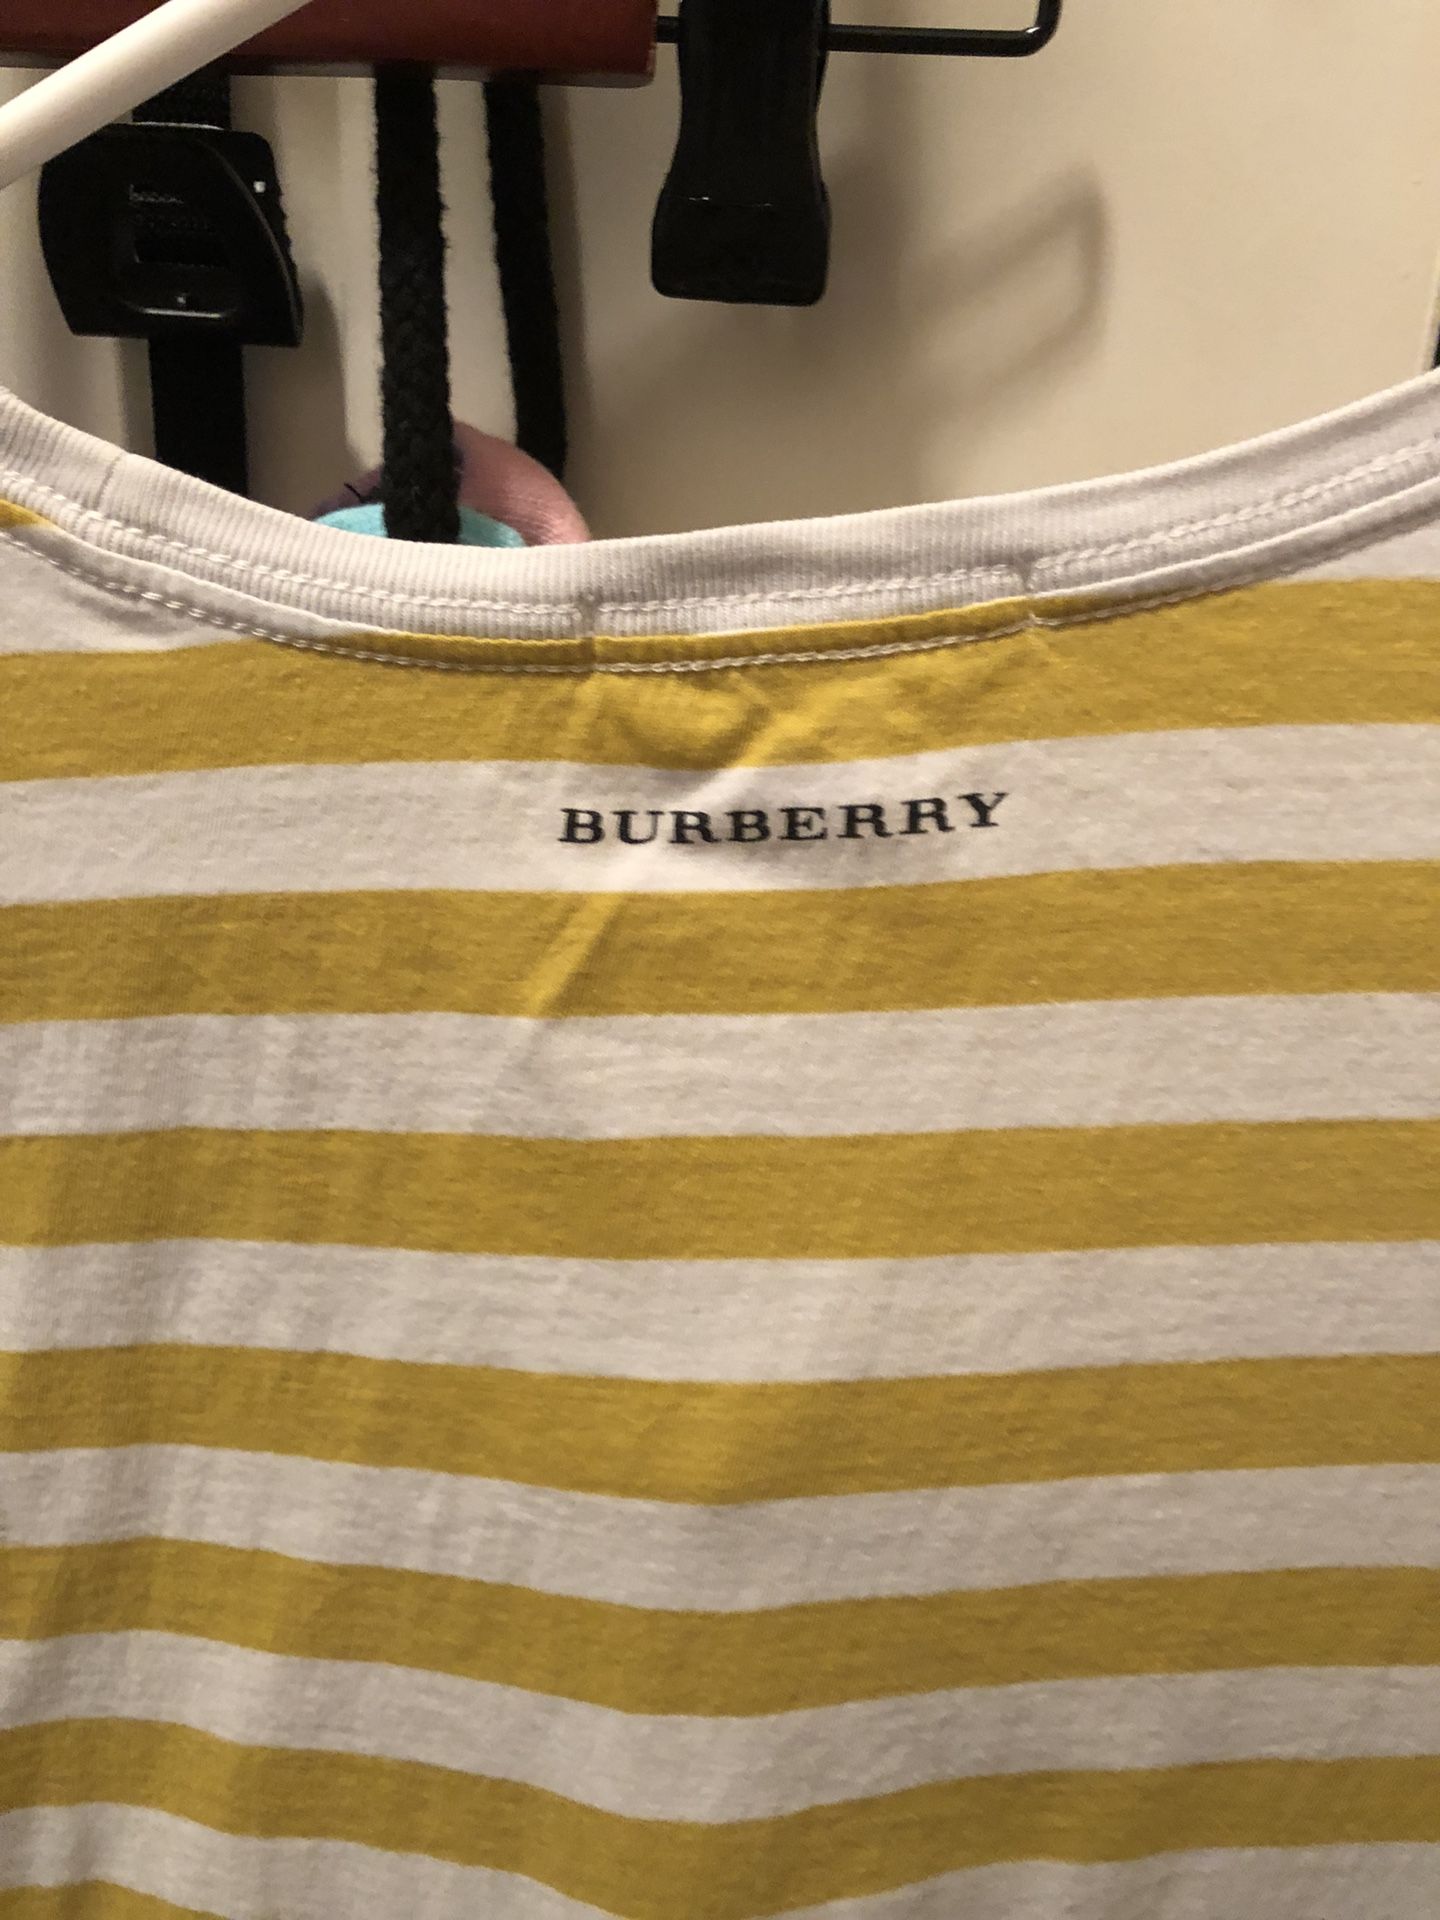 Burberry T-shirt 12Y (Adult size S)